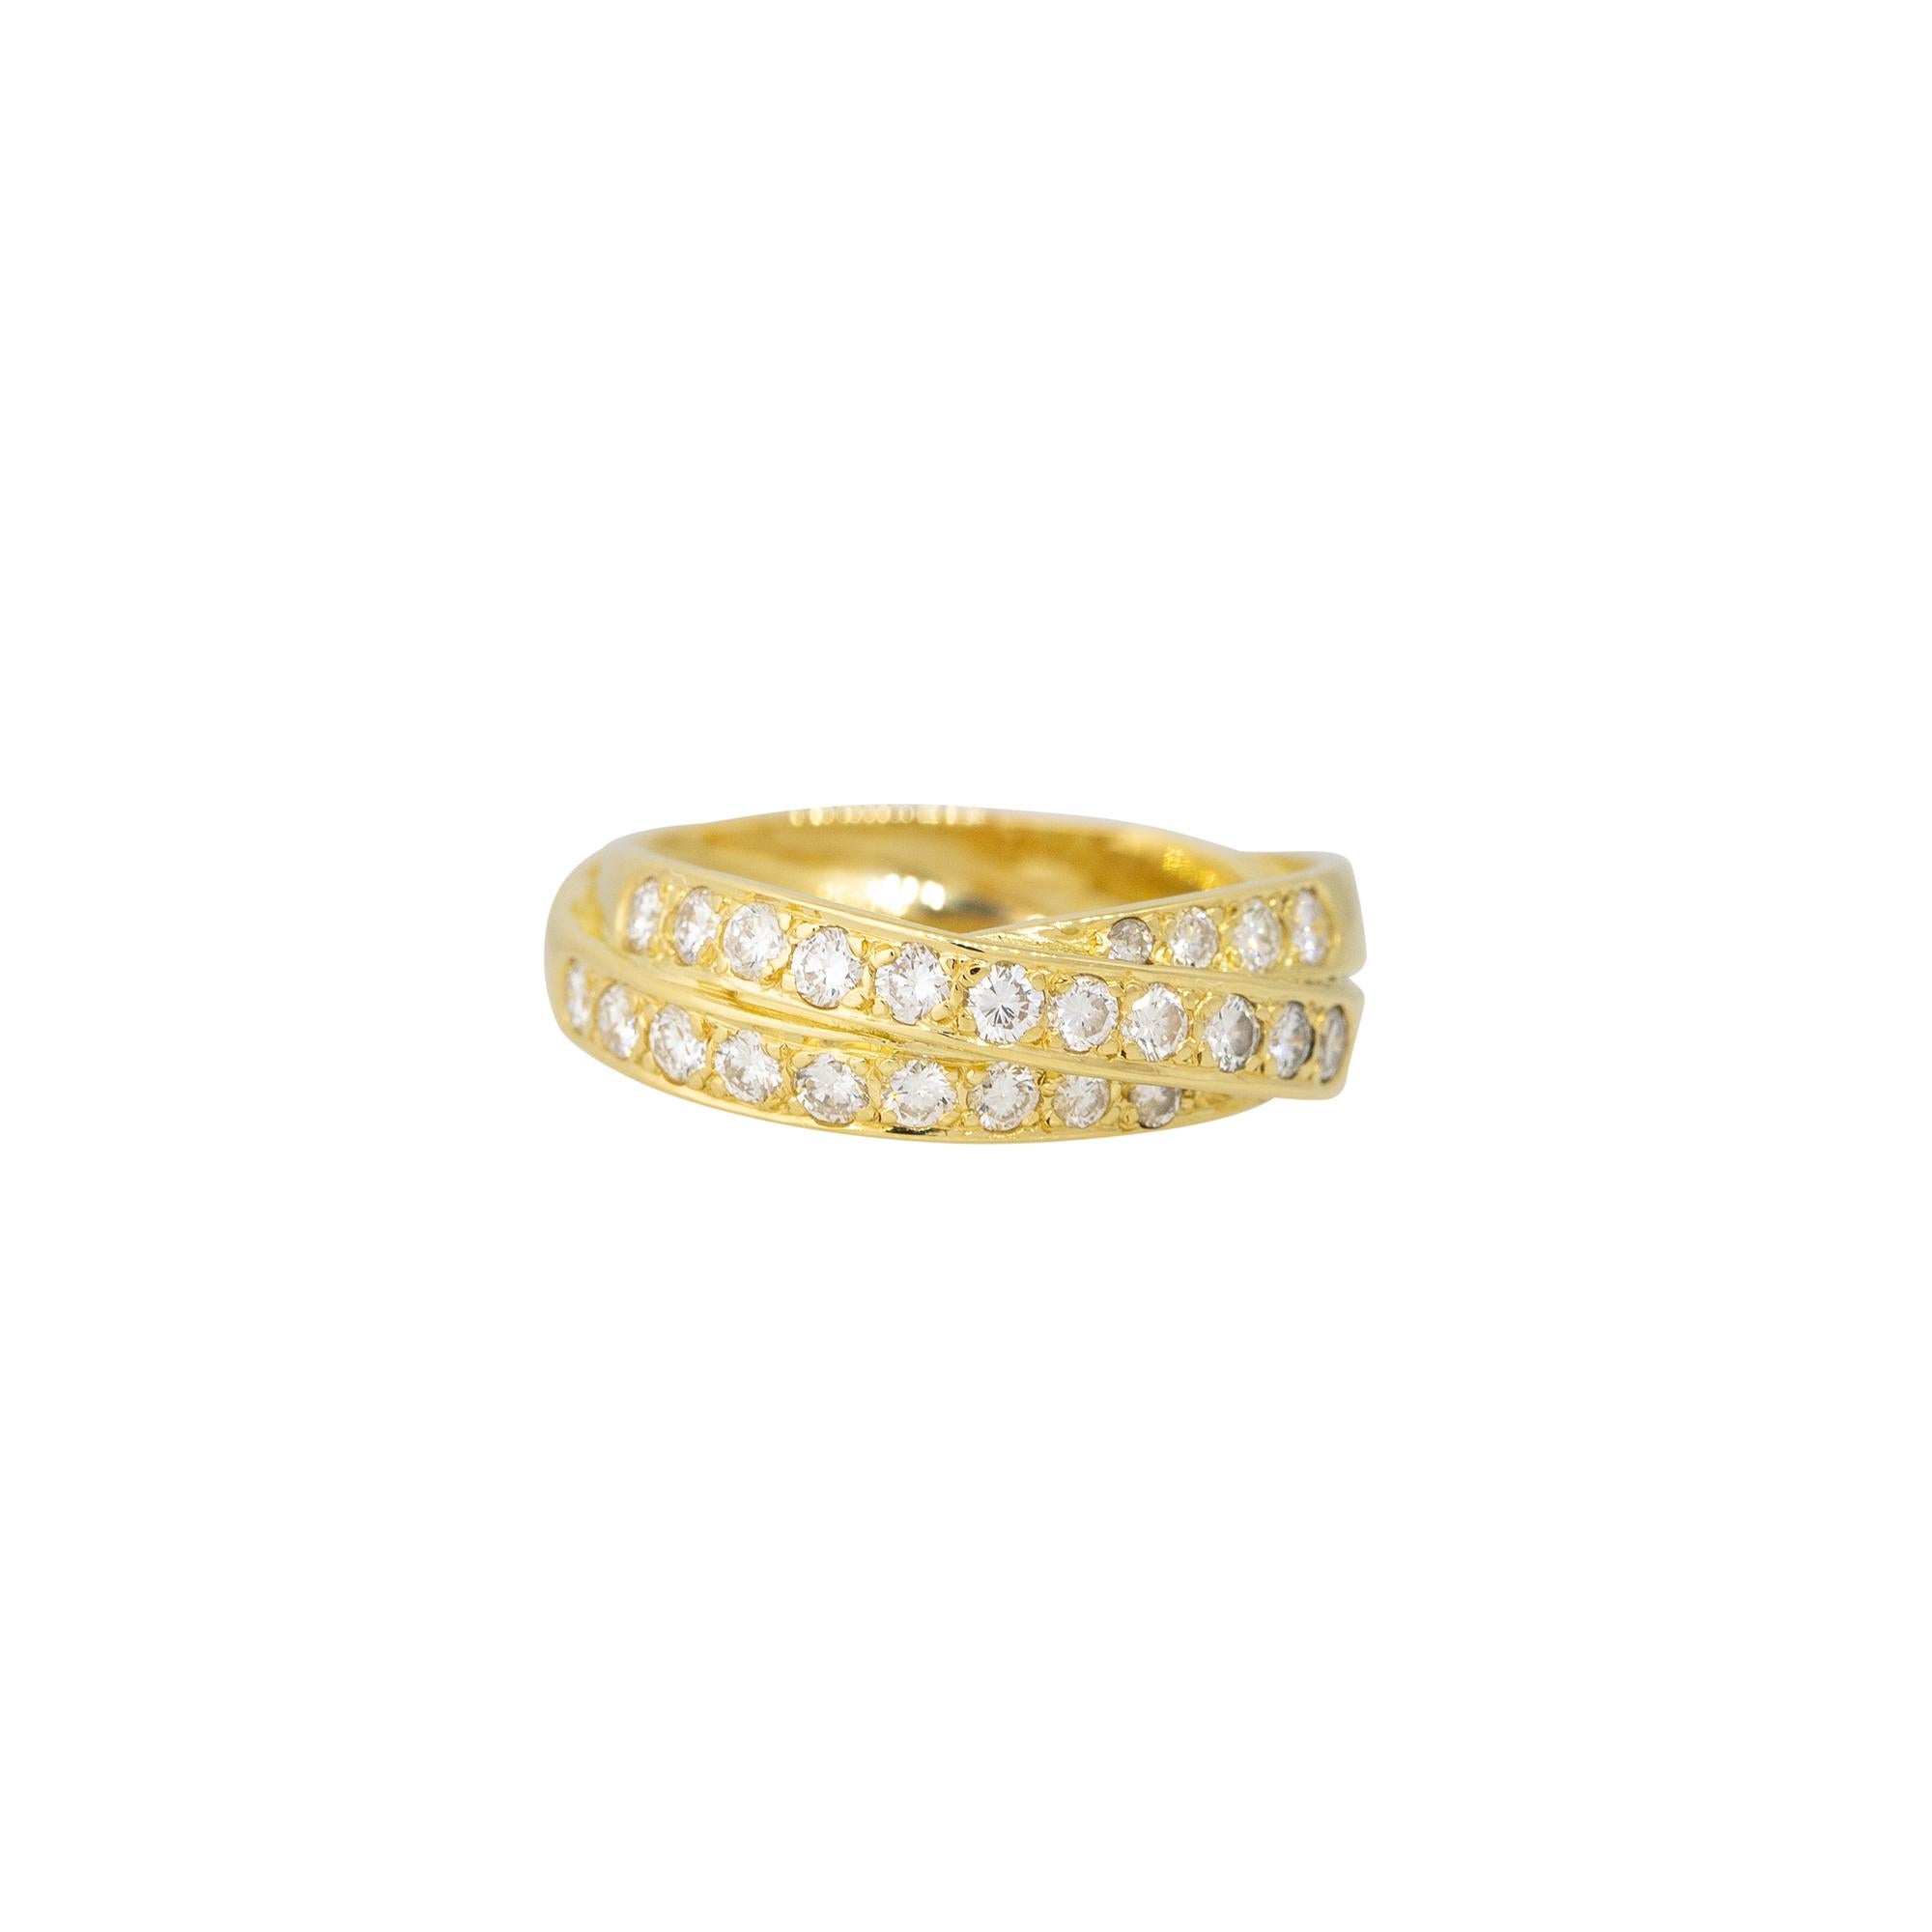 18k Yellow Gold 0.70ct Round Brilliant Cut Diamond 3-Row Intertwined Ring

Product: Intertwined diamond ring
Material: 18k Yellow Gold
Diamond Details: There are approximately 0.70 carats of round brilliant cut diamonds (24 stones)
Diamond Clarity: